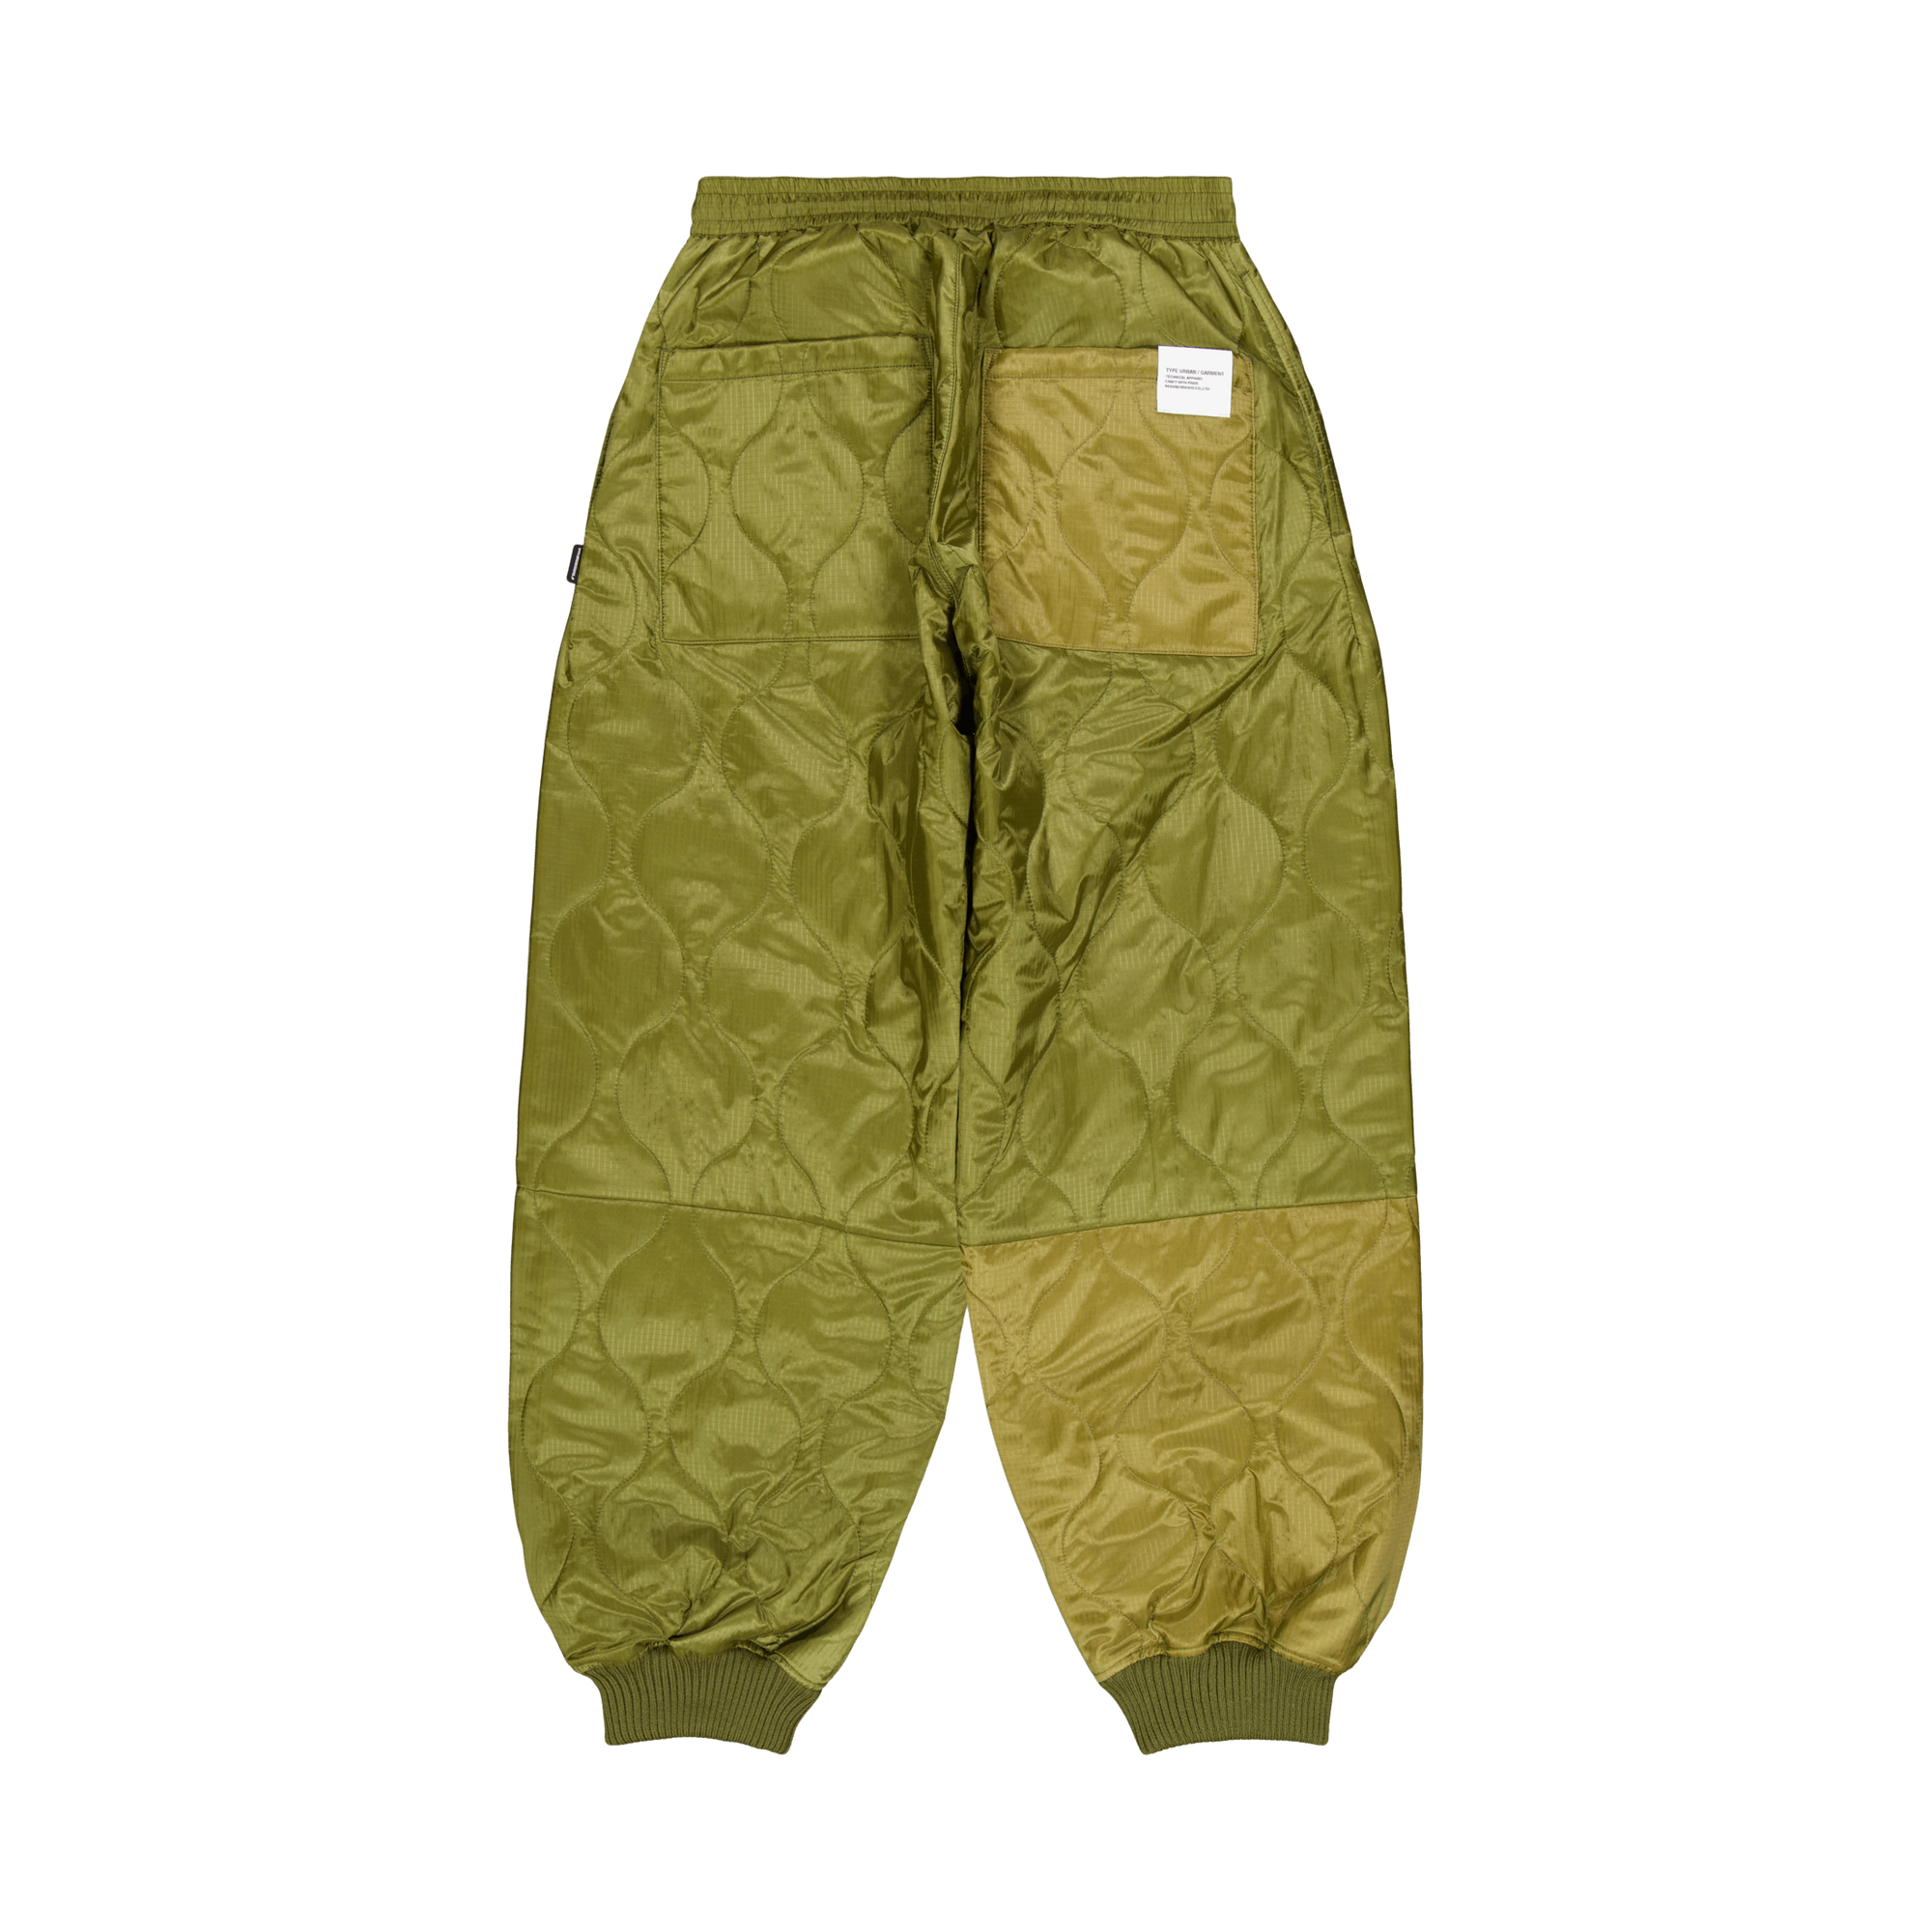 Quilting Pants Olive Drab